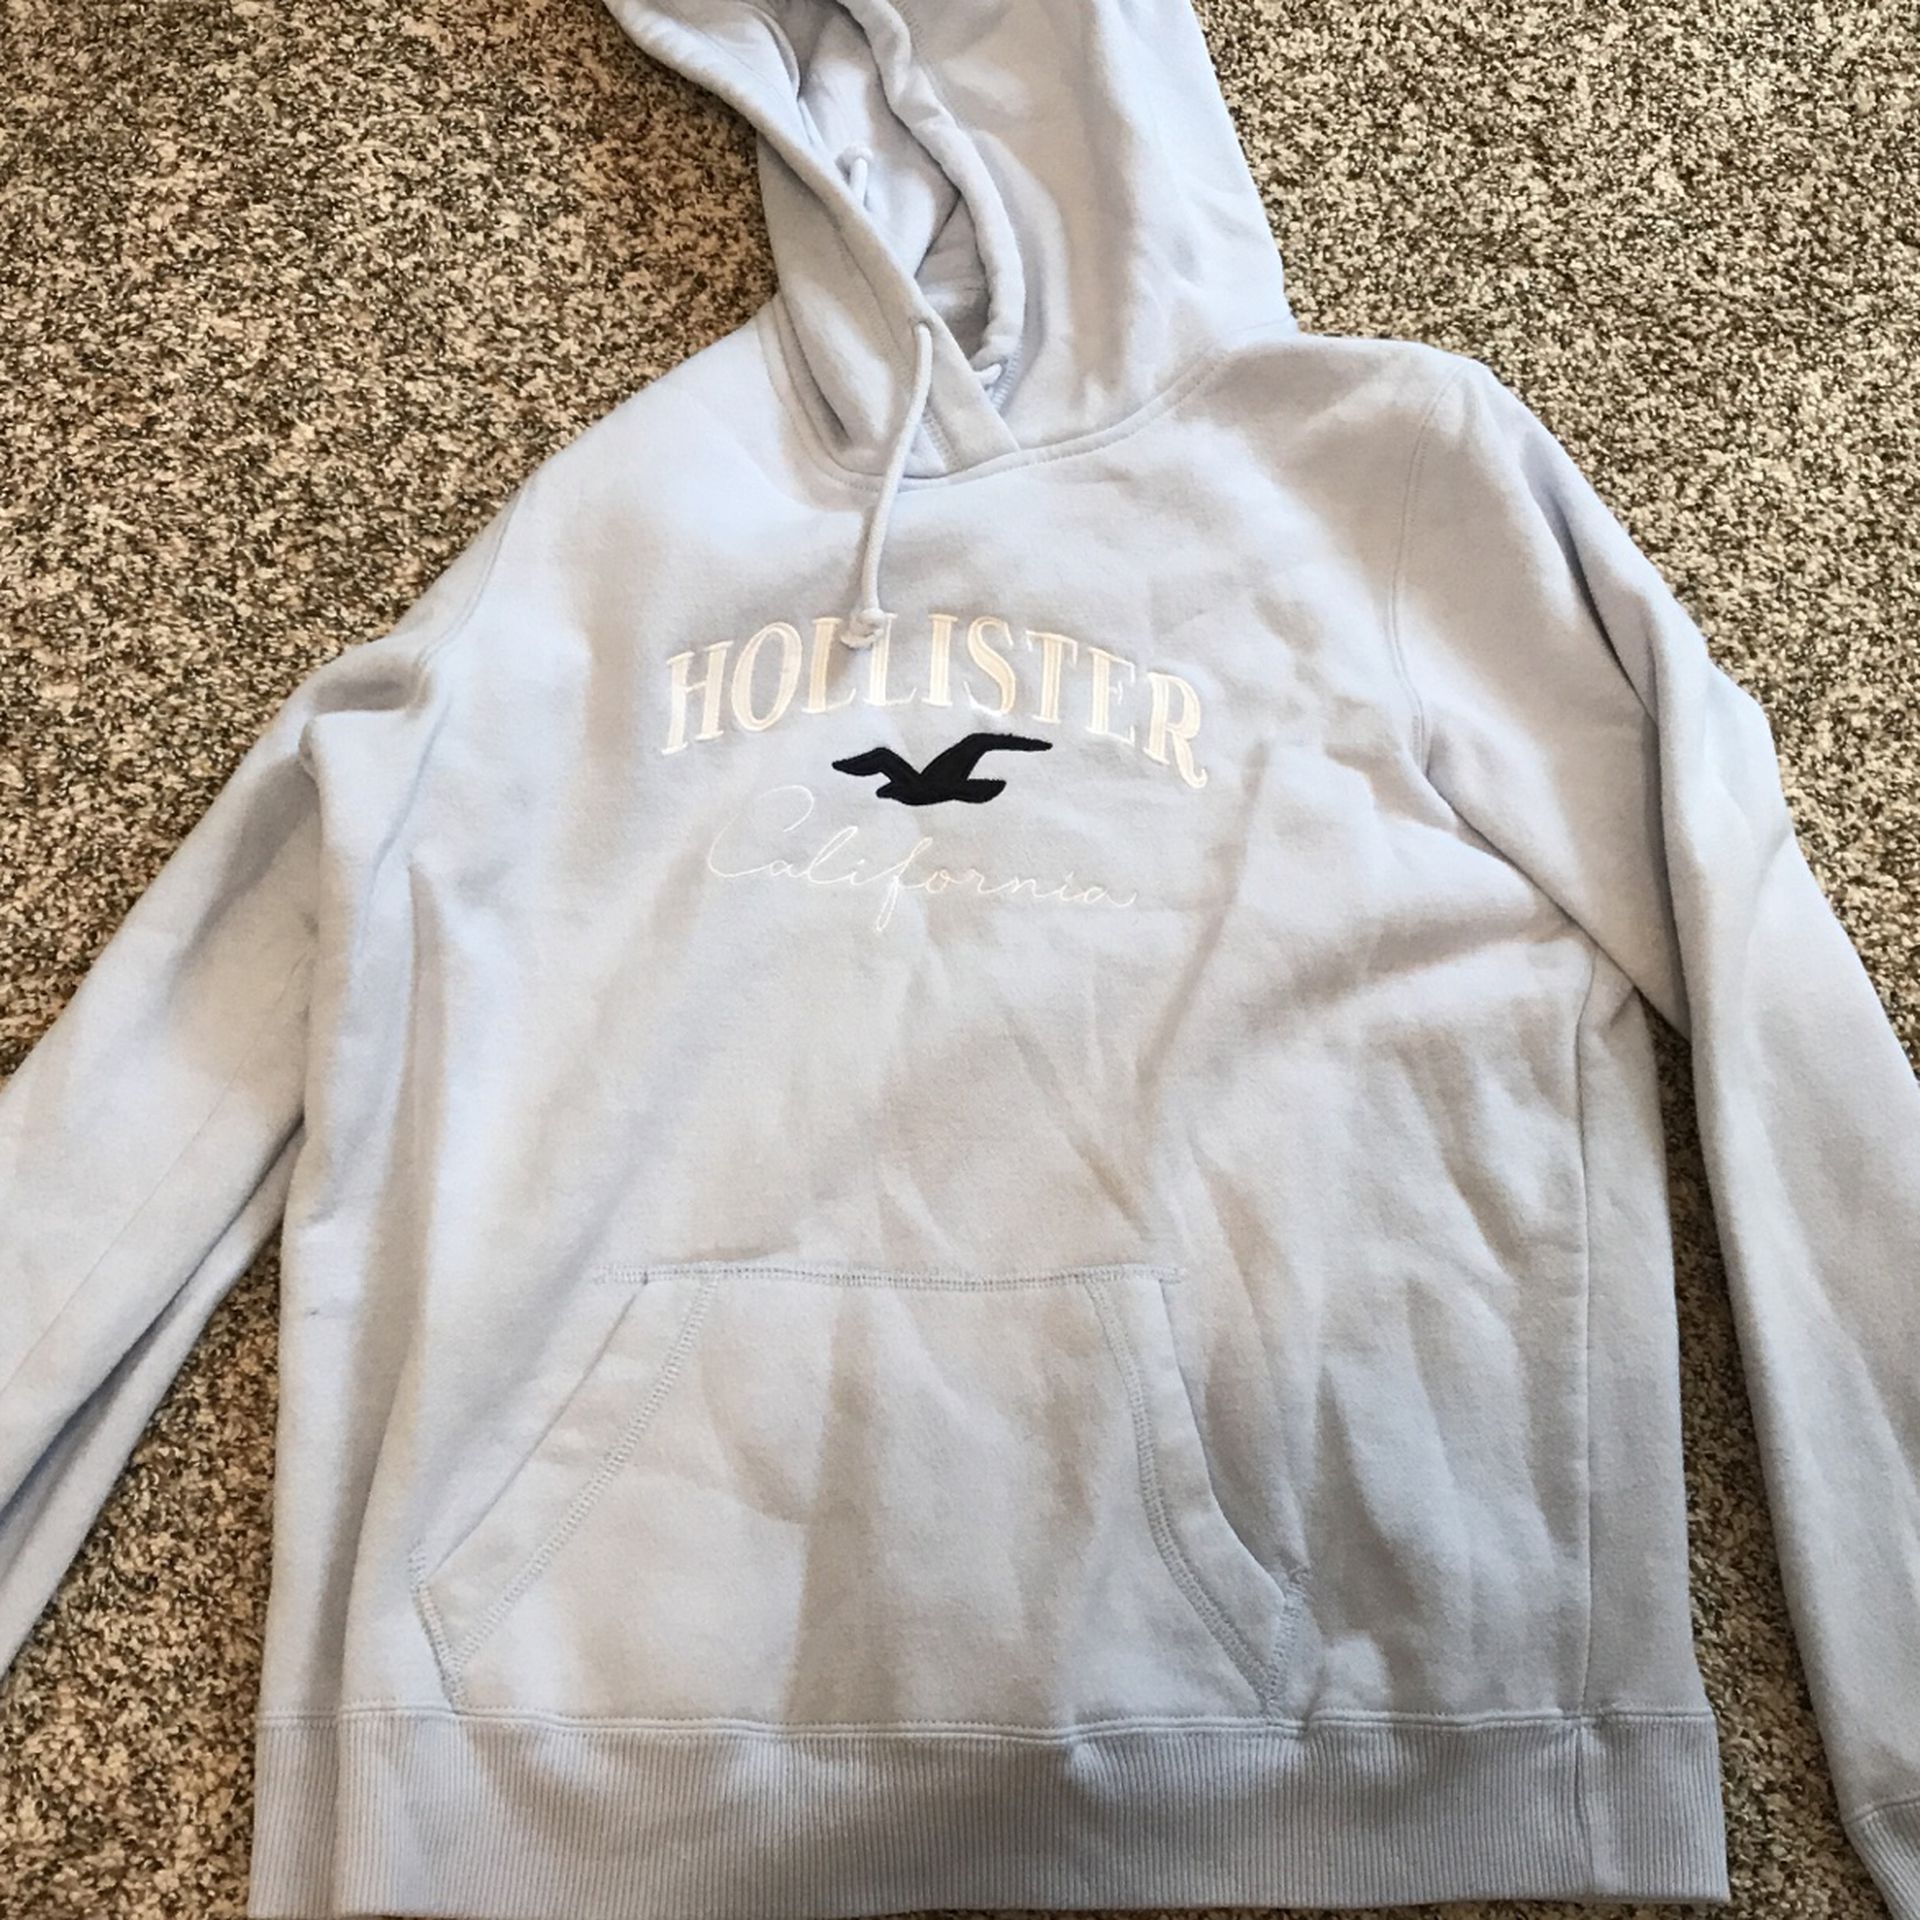 Hollister baby blue hoodie large size